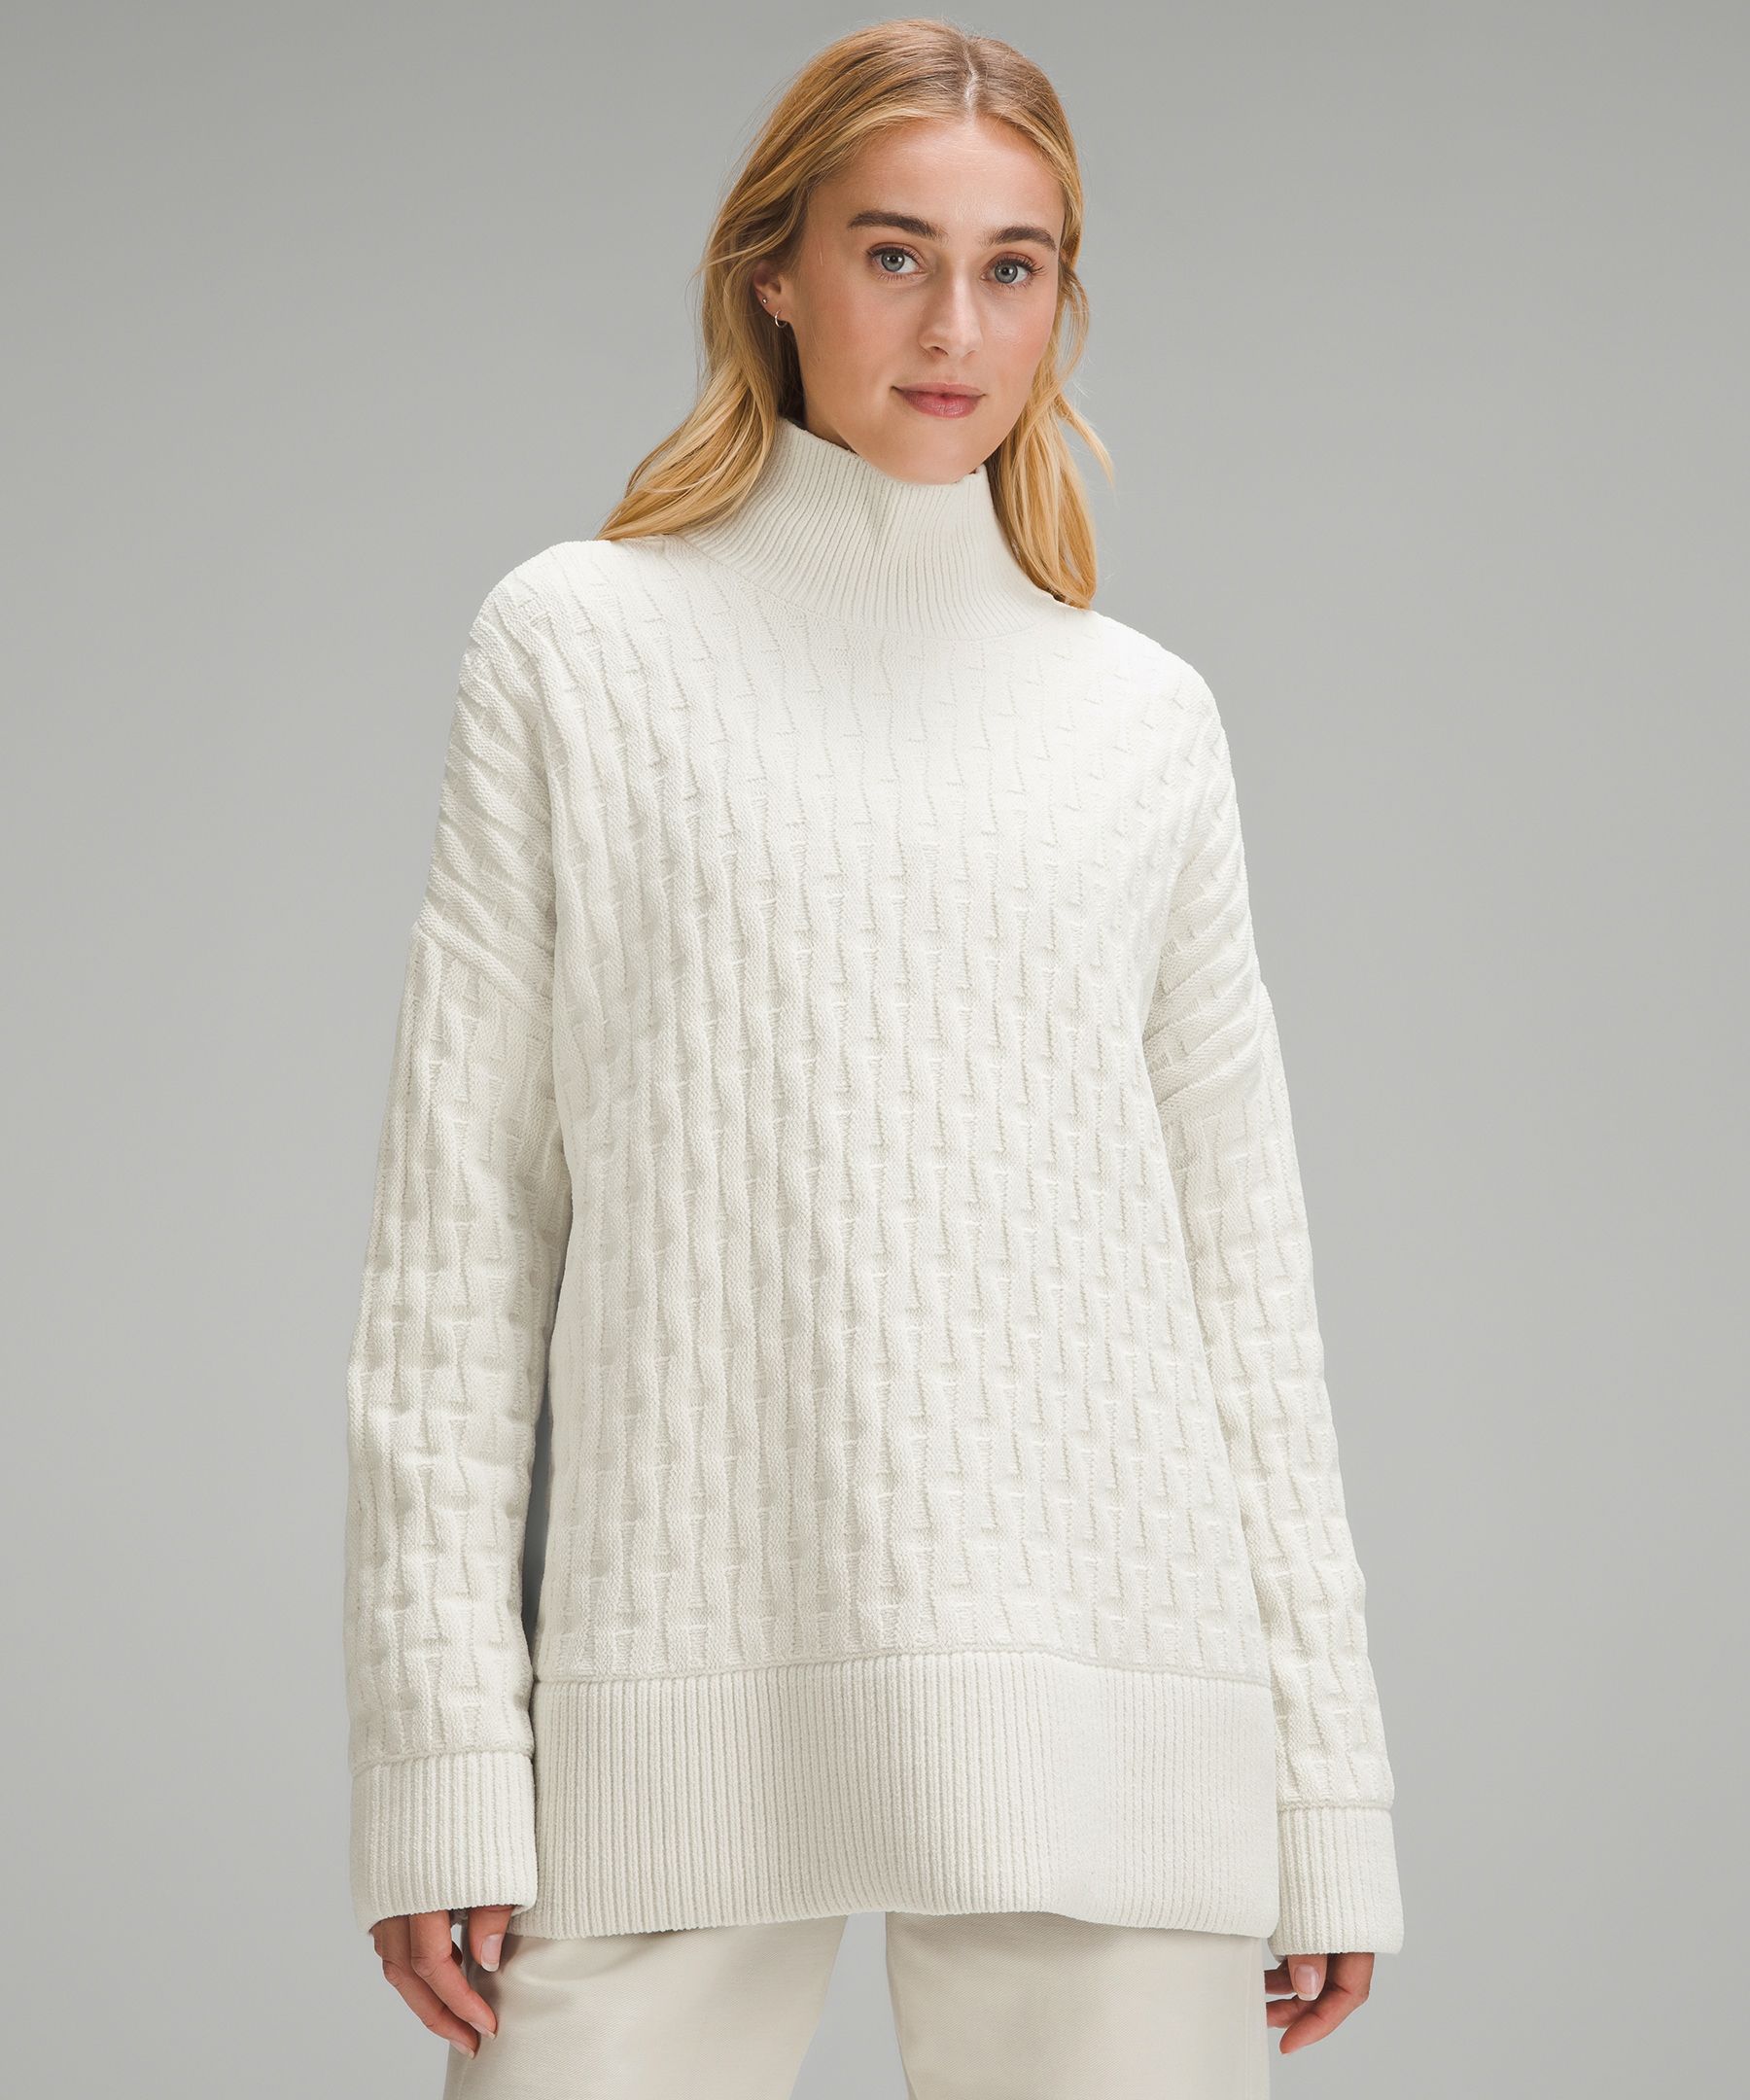 Lululemon Cable-Knit Relaxed-Fit Sweater